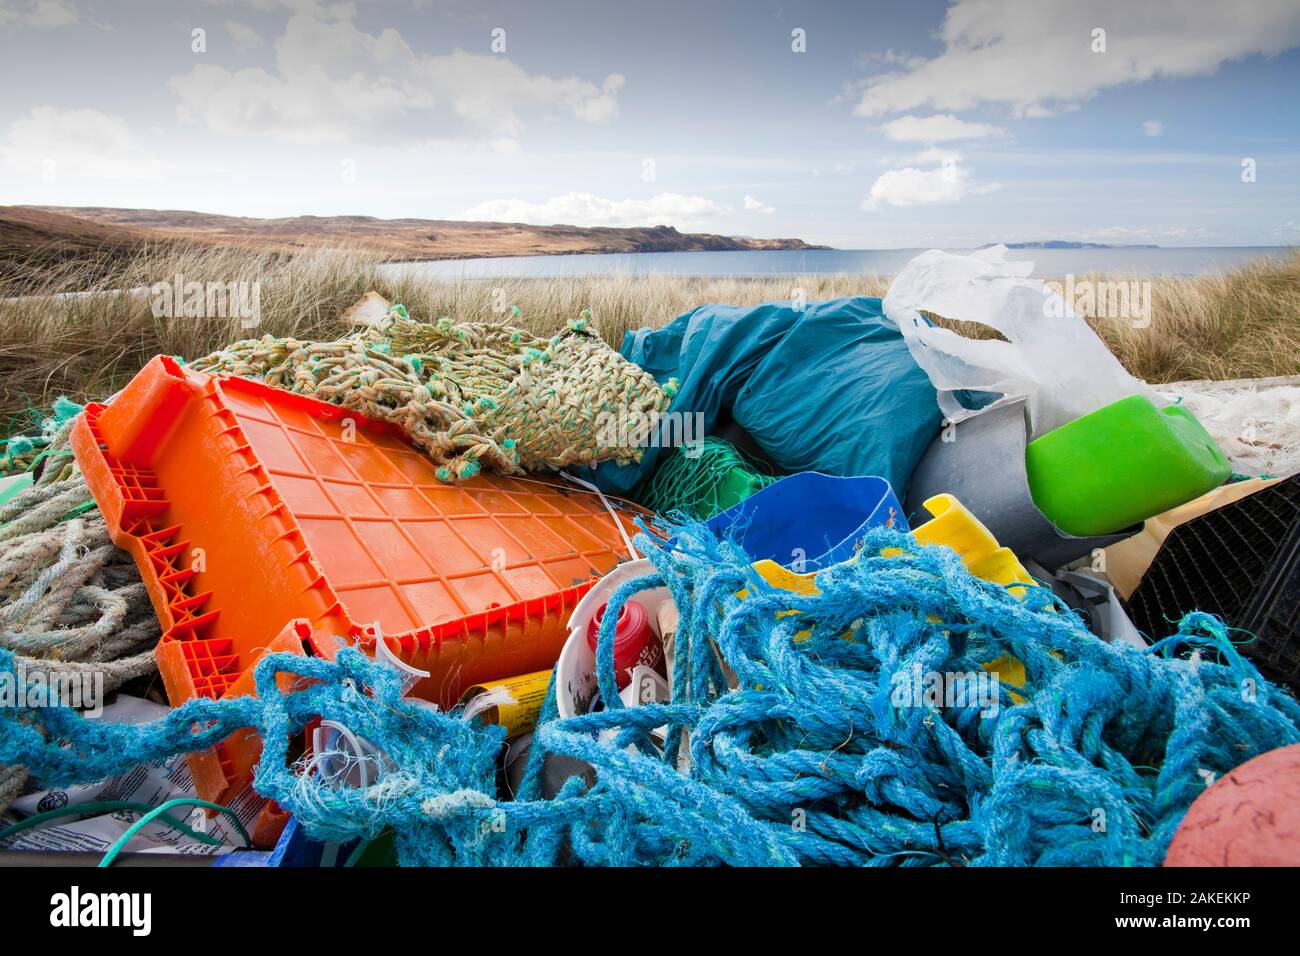 Plastic rubbish washed ashore from the sea in Glen Brittle, Isle of skye, Scotland, UK. May 2012 Stock Photo